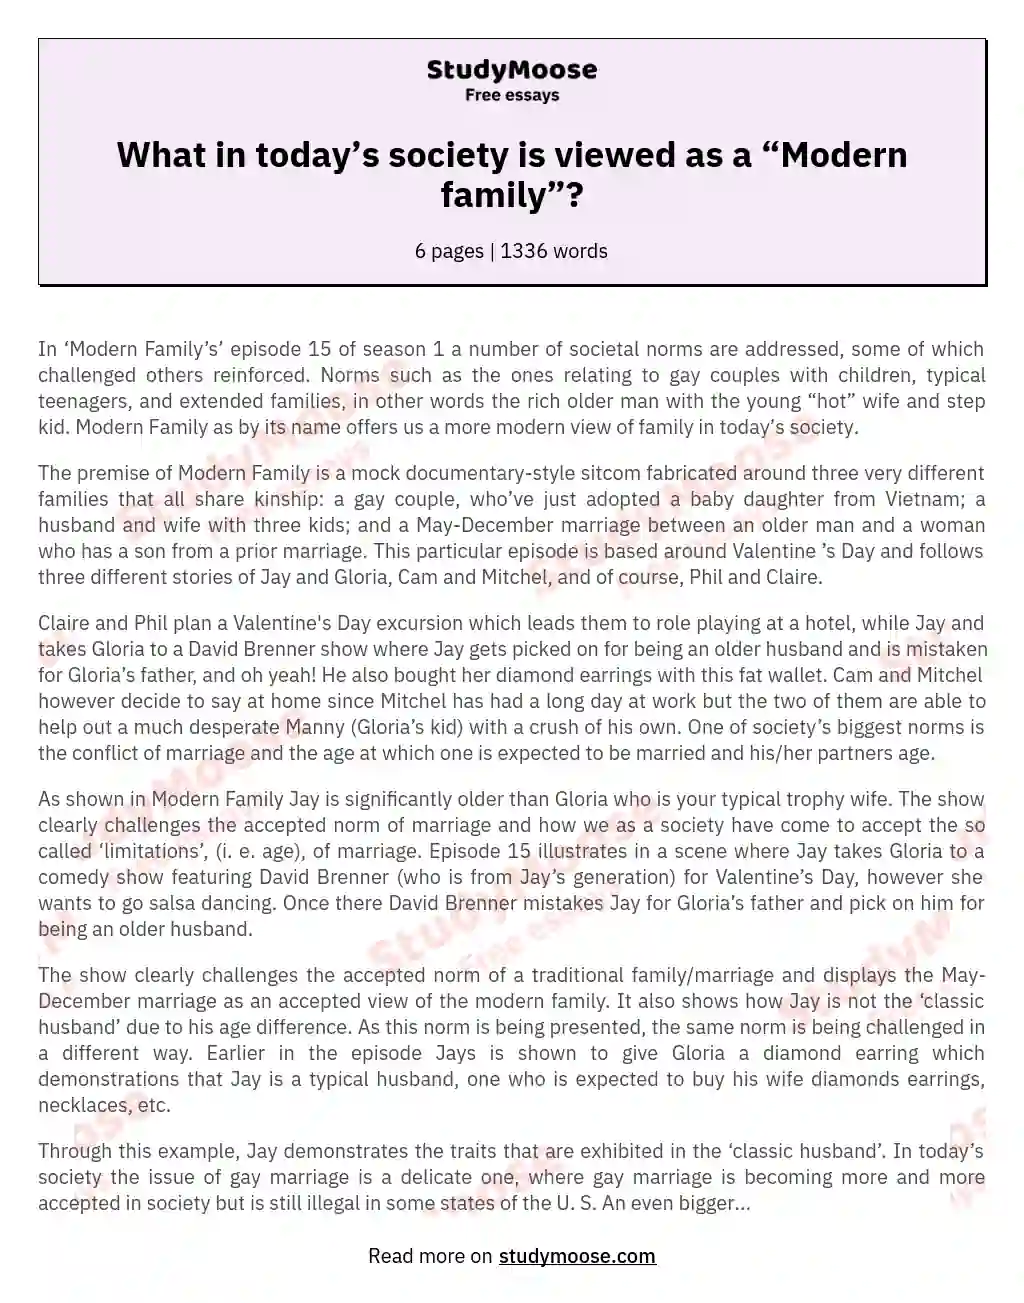 What in today’s society is viewed as a “Modern family”? essay